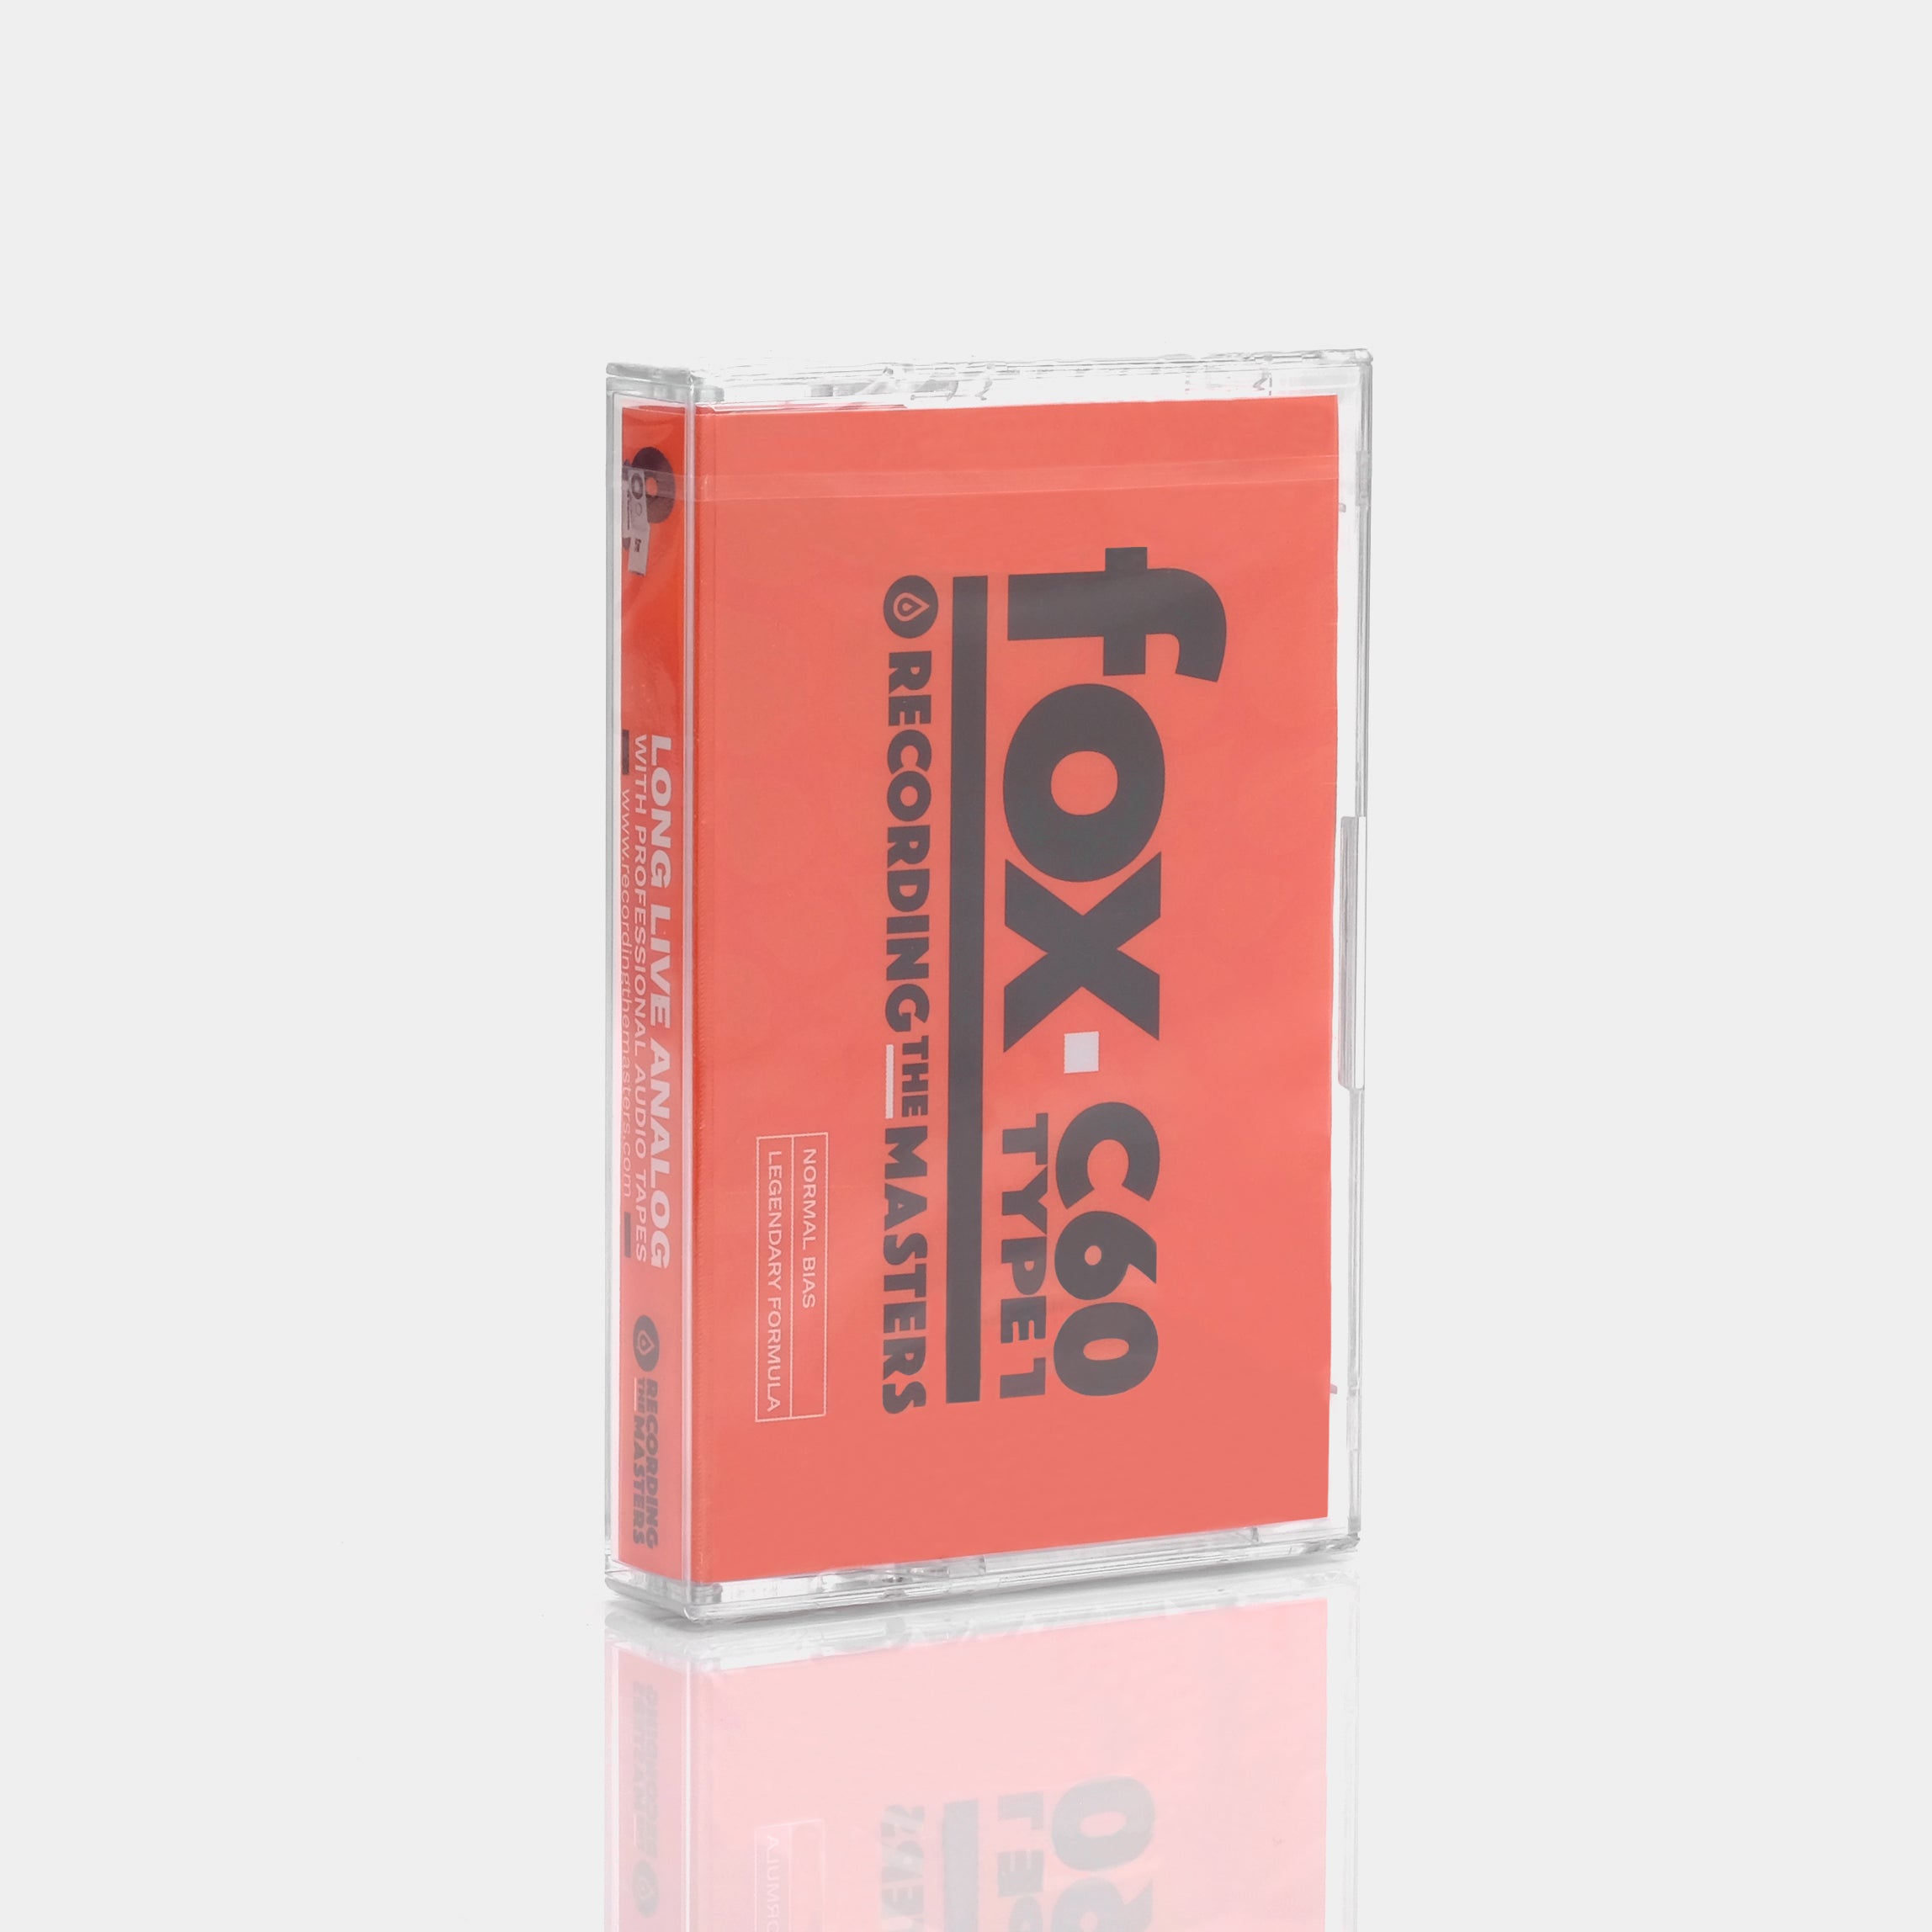 Fox C60 Type I Blank Recordable Cassette Tape